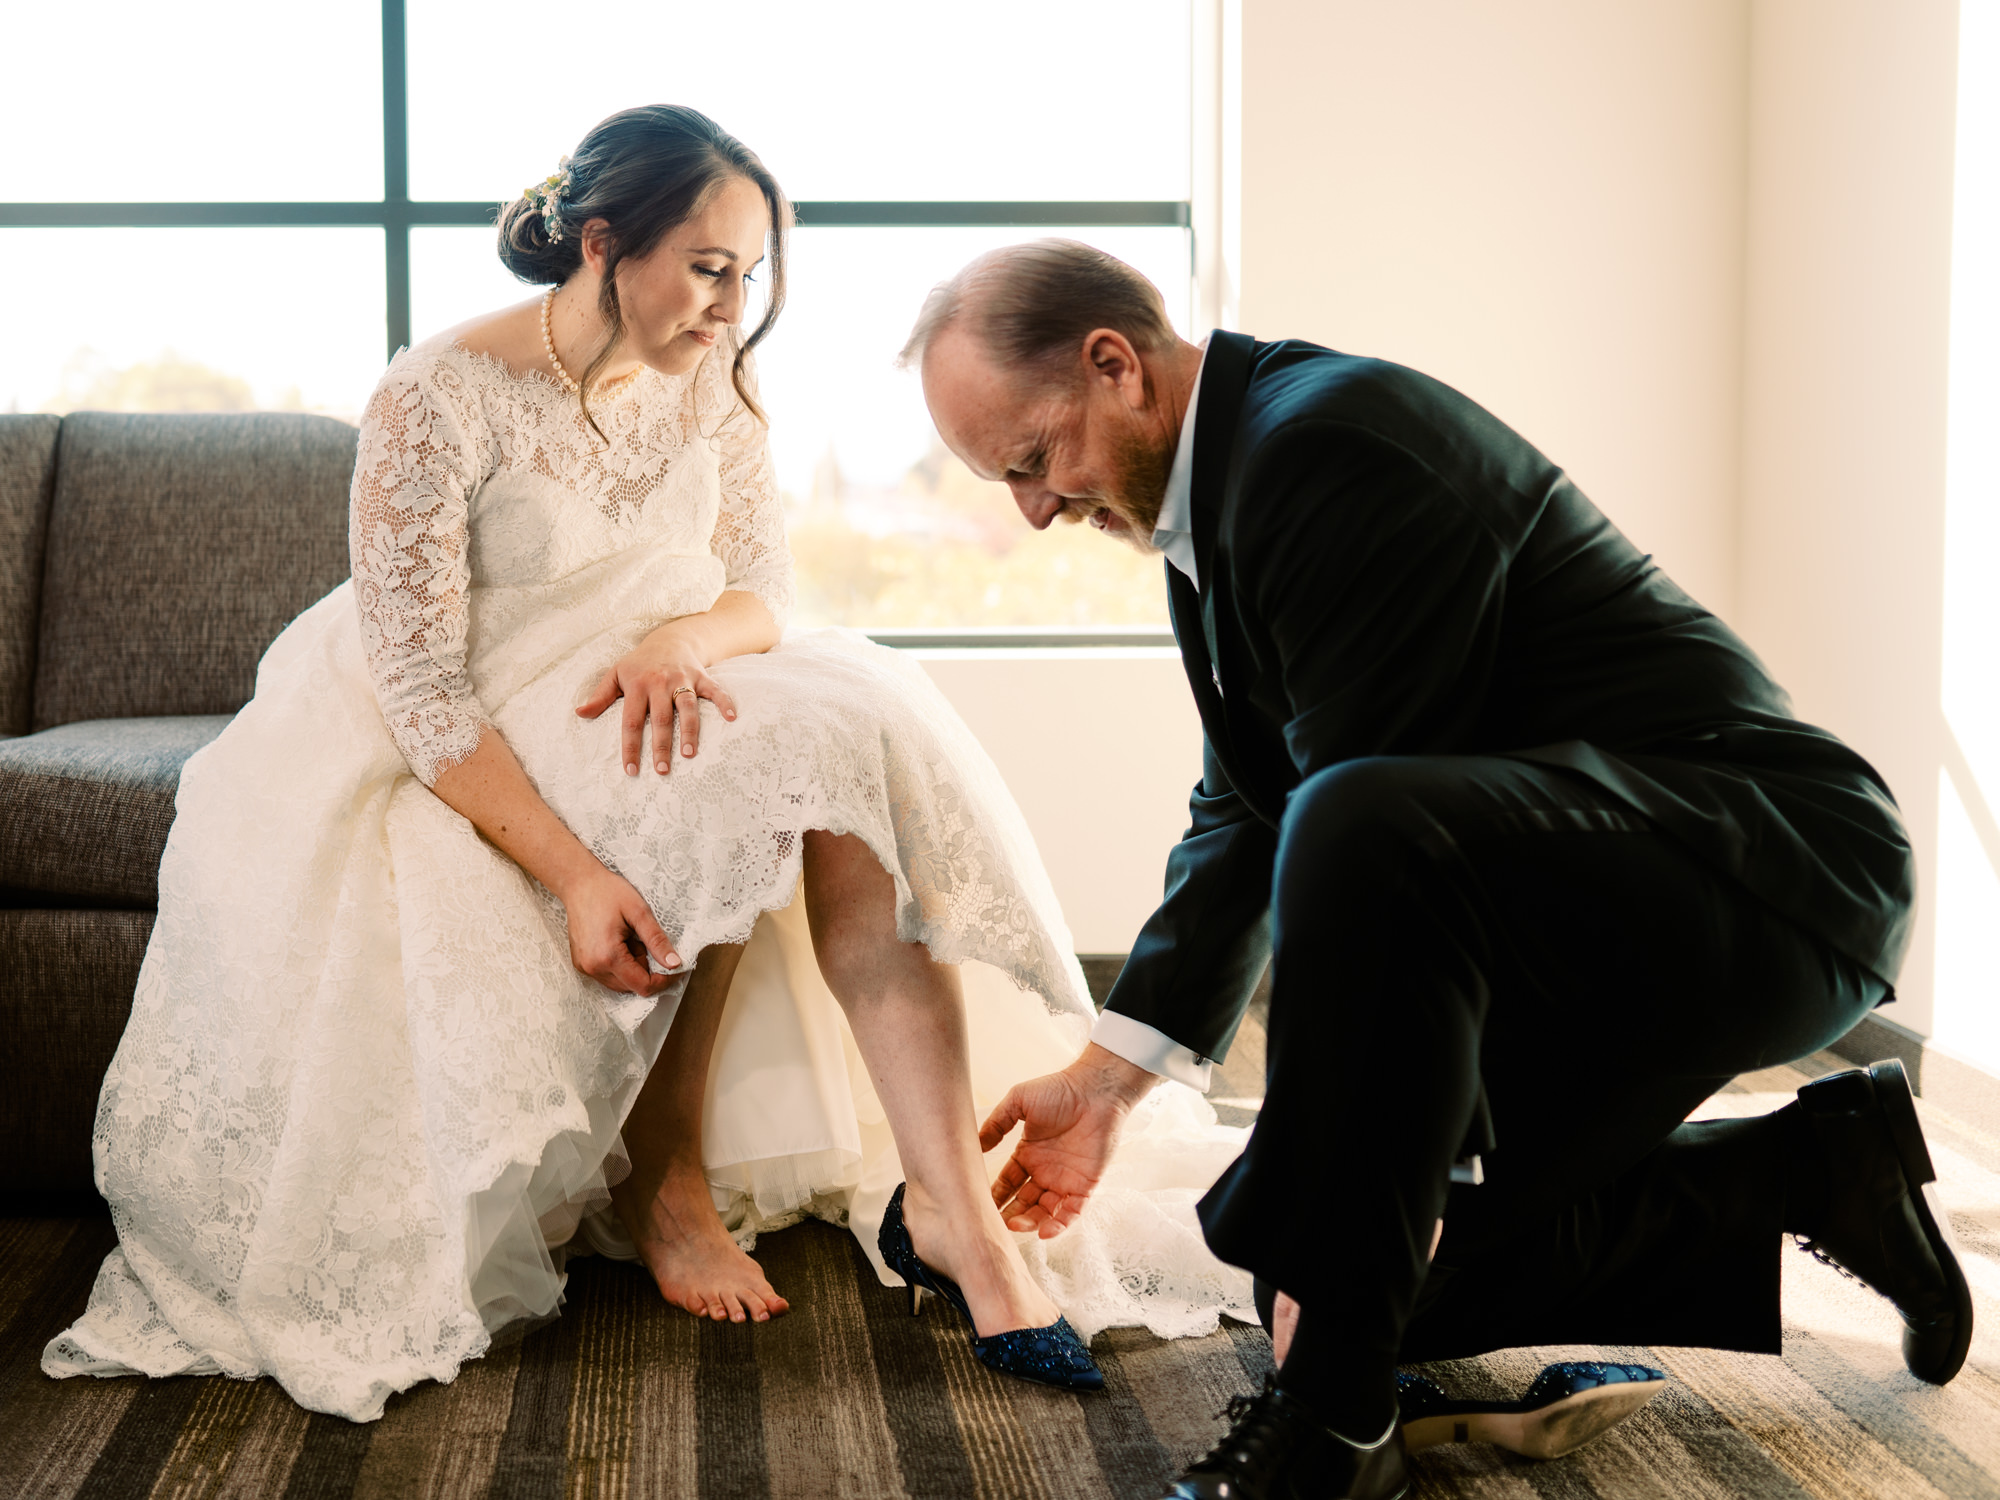 Father of the bride helps her put on her shoes